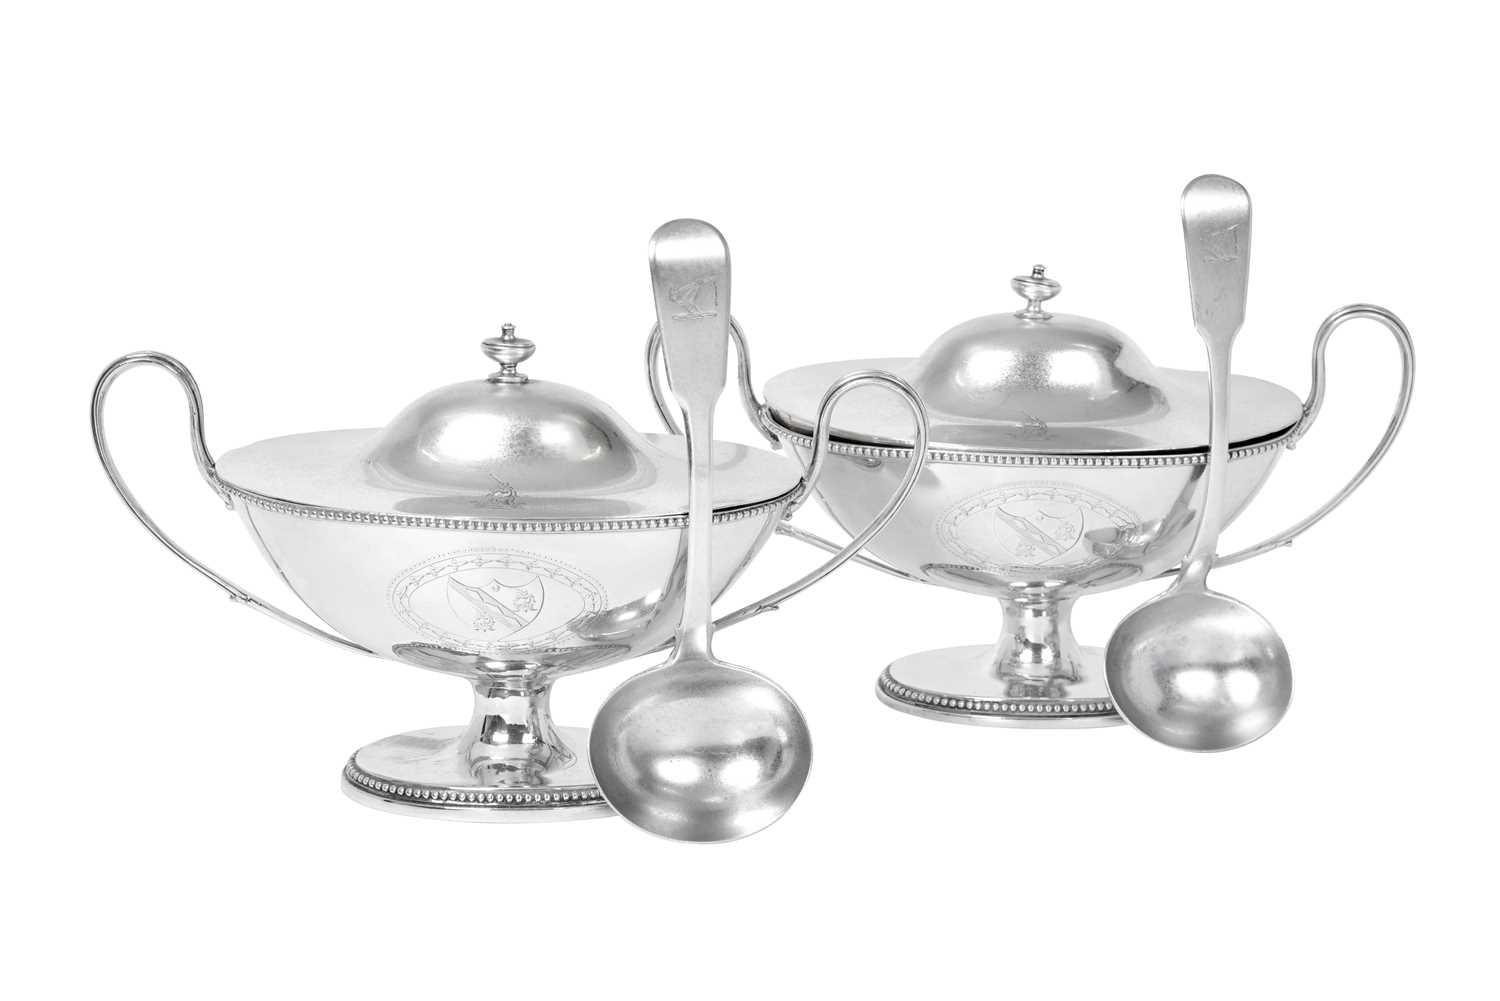 Lot 2189 - A Pair of George III Silver Sauce-Tureens and Covers